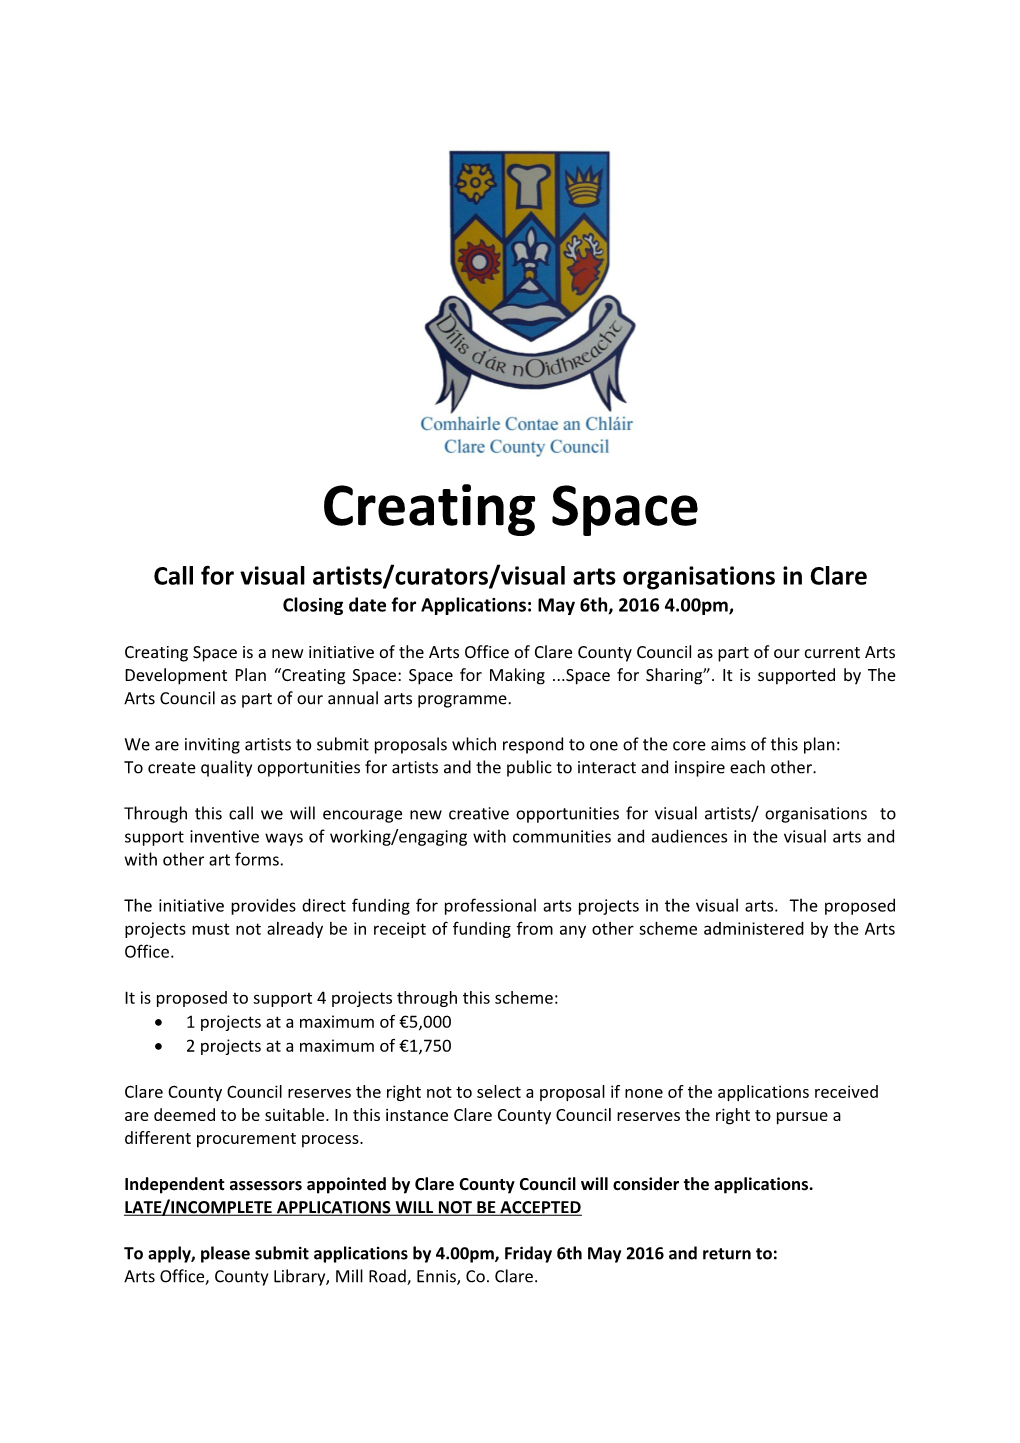 Call for Visual Artists/Curators/Visual Arts Organisations in Clare